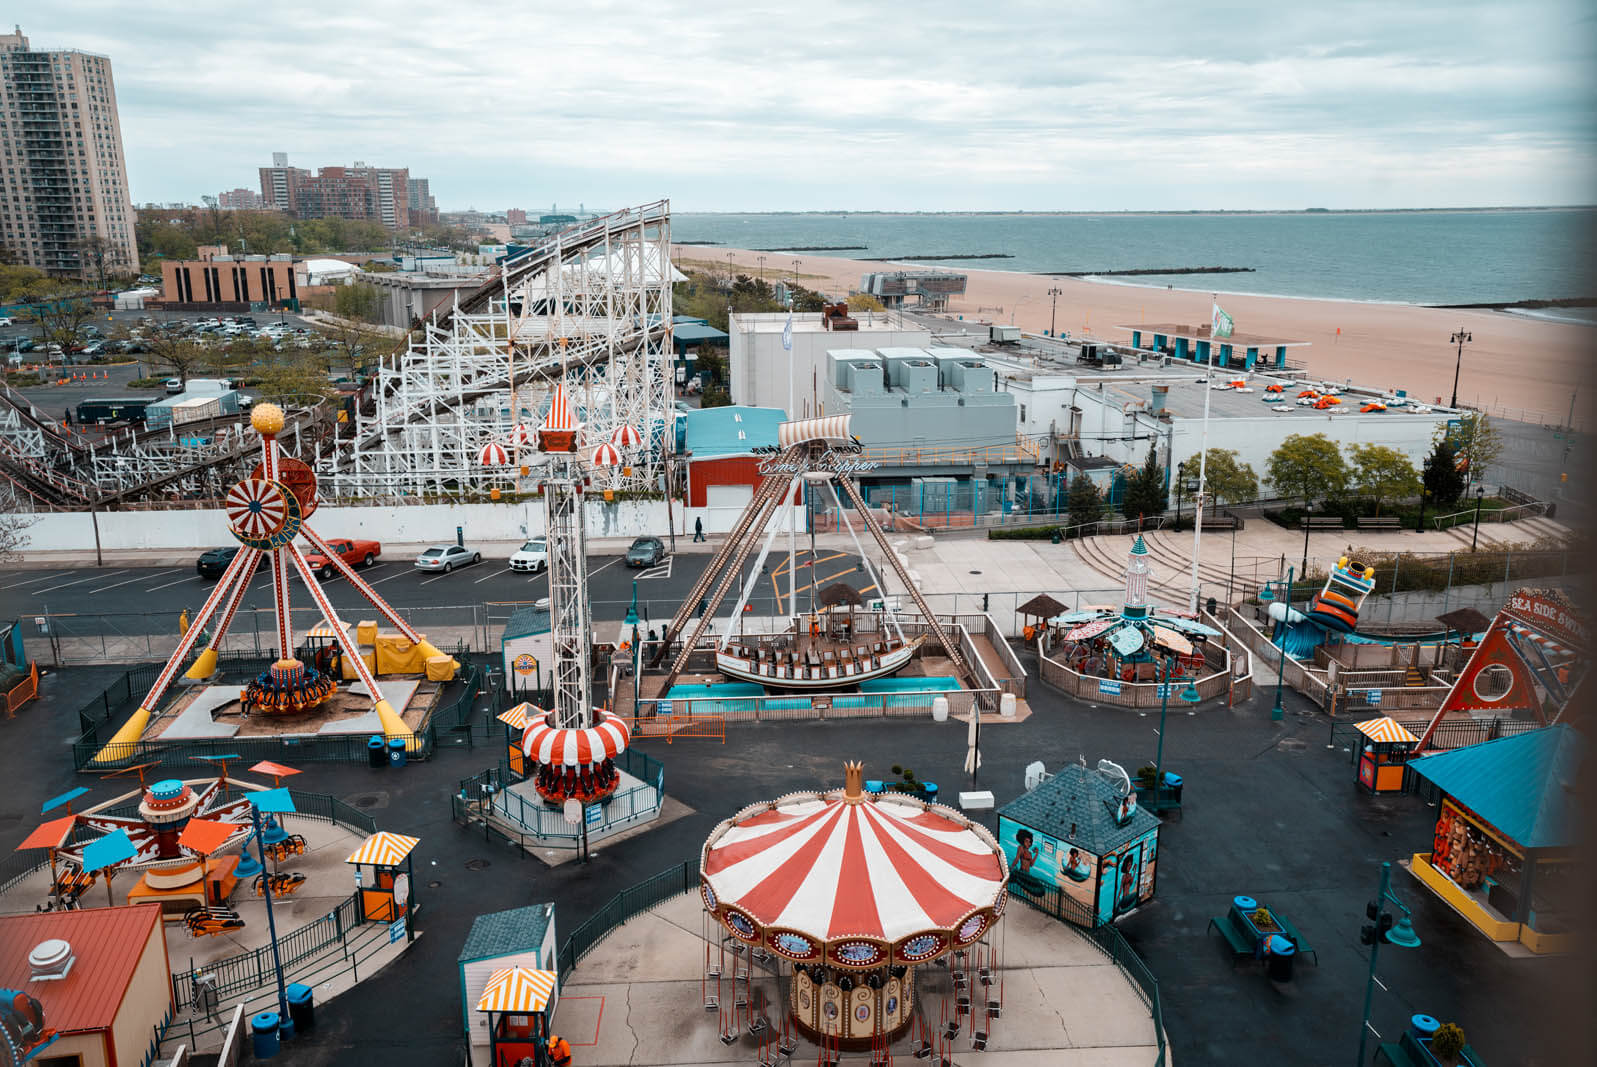 aerial view of rides from Denos Wonder Wheel at Coney Island and the beach